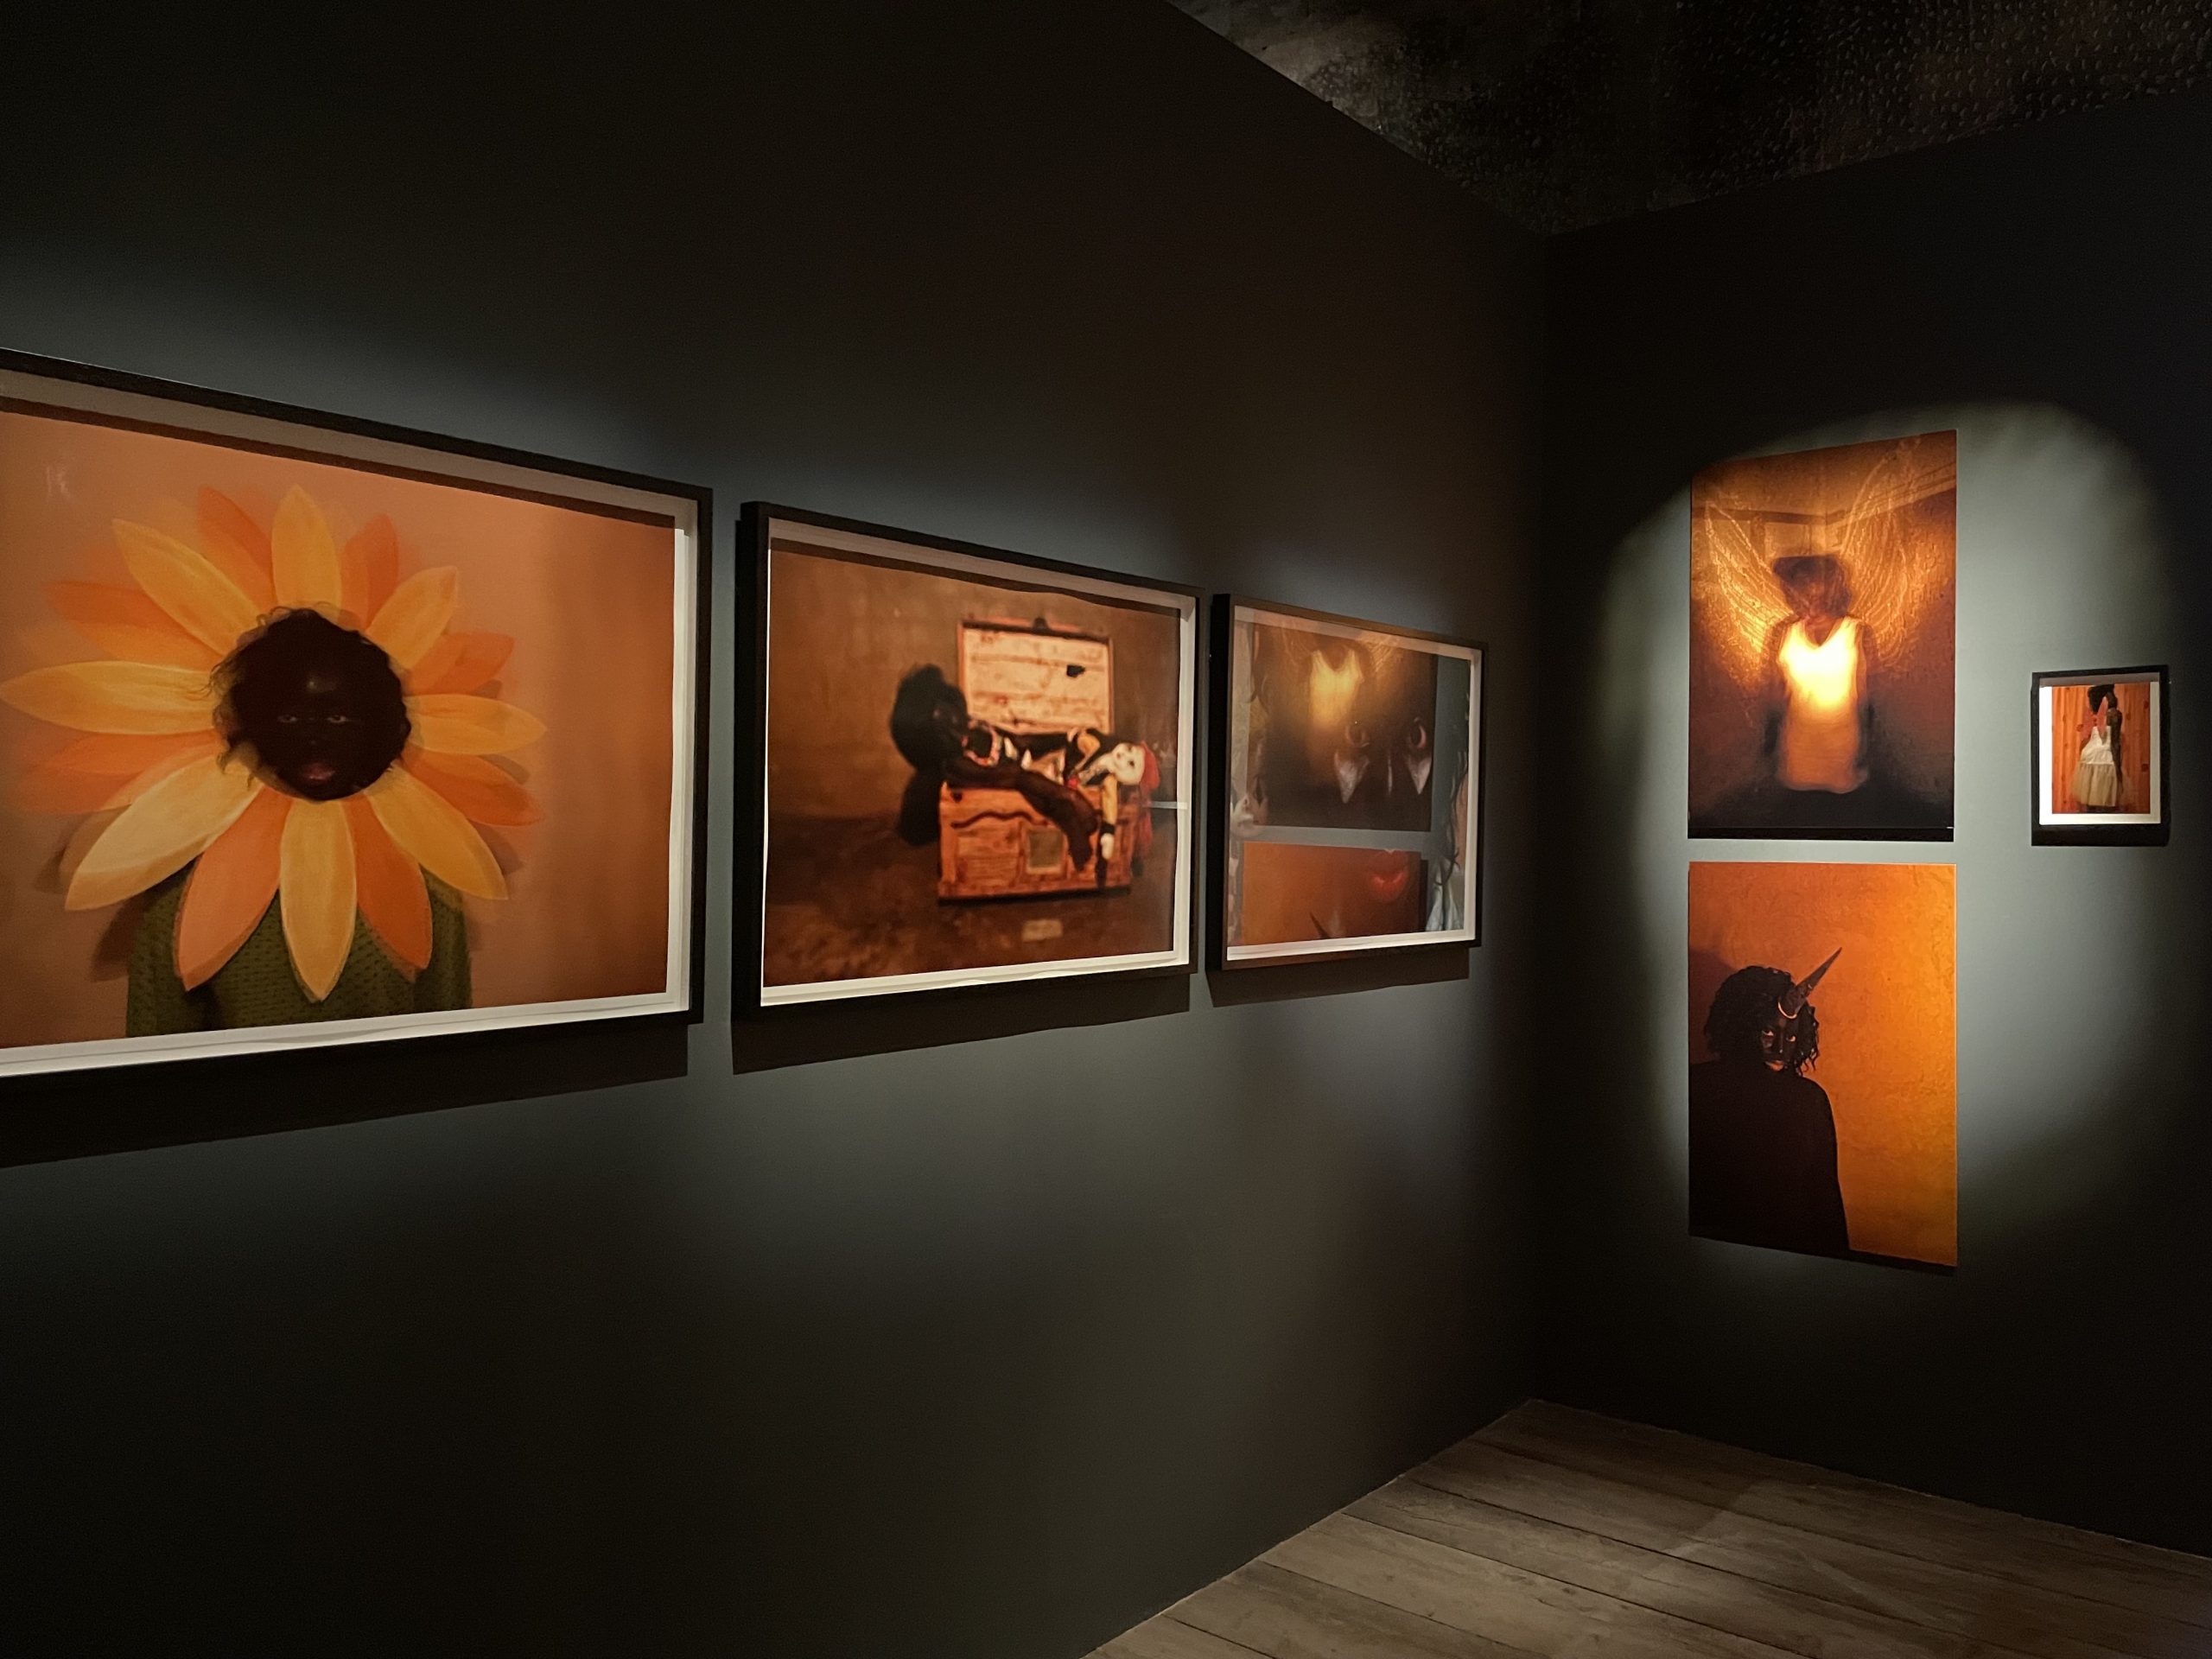 African and Diaspora Artists - South Africa Pavilion, Installation view of "Into the Light" curated by Amé Bell. Photo credit: Adéọlá Ọlágúnjú for TSA Art Magazine